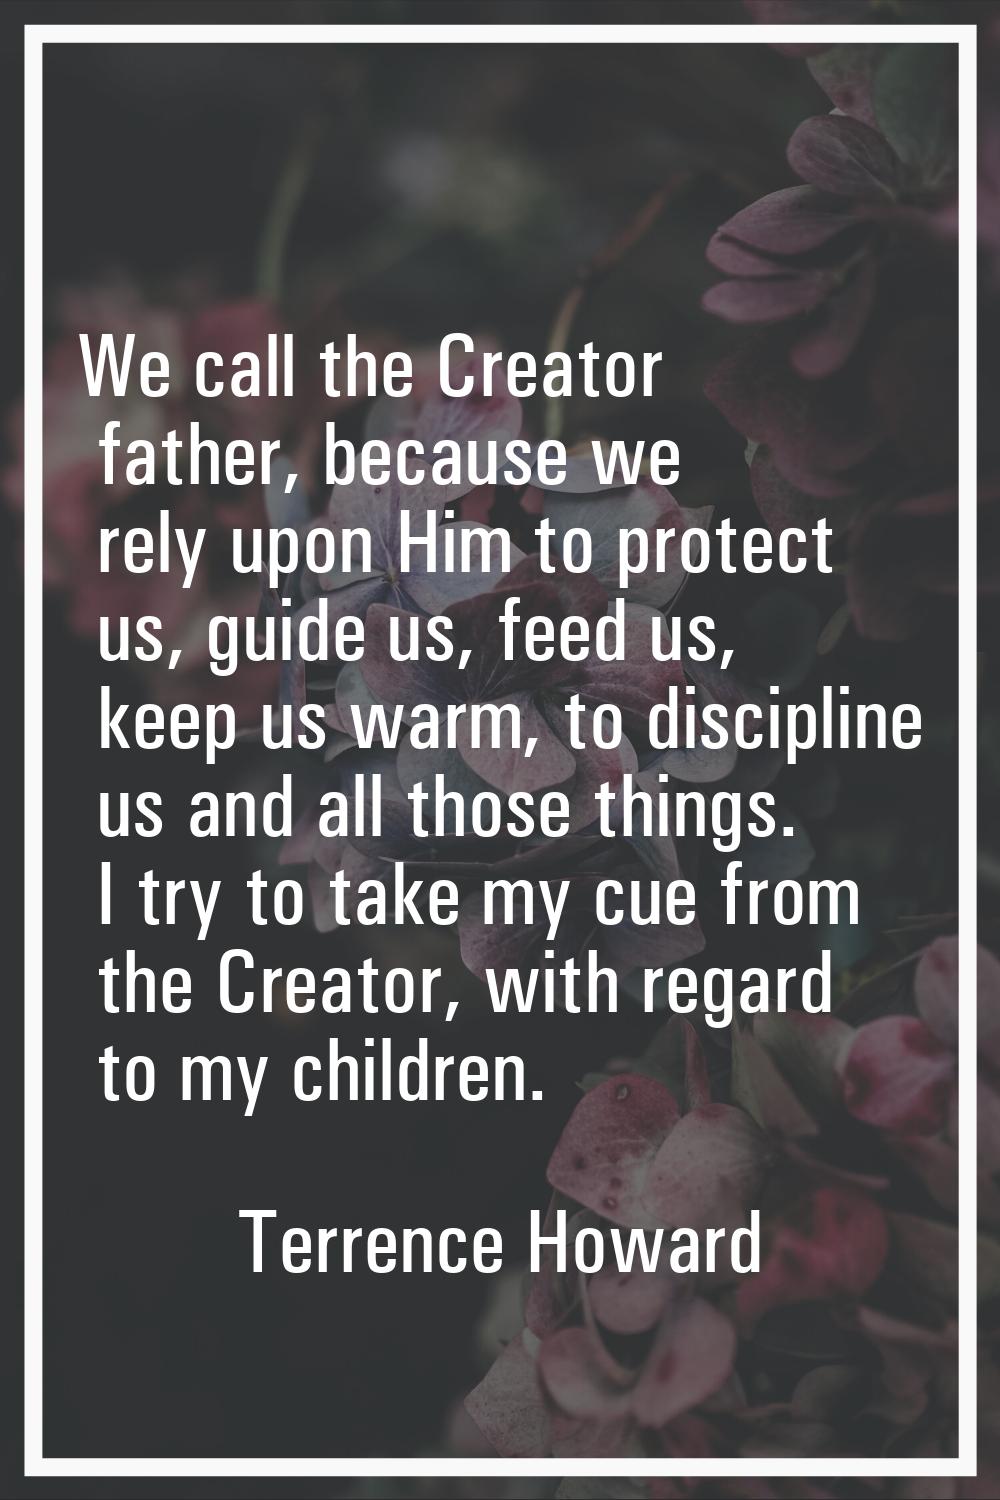 We call the Creator father, because we rely upon Him to protect us, guide us, feed us, keep us warm